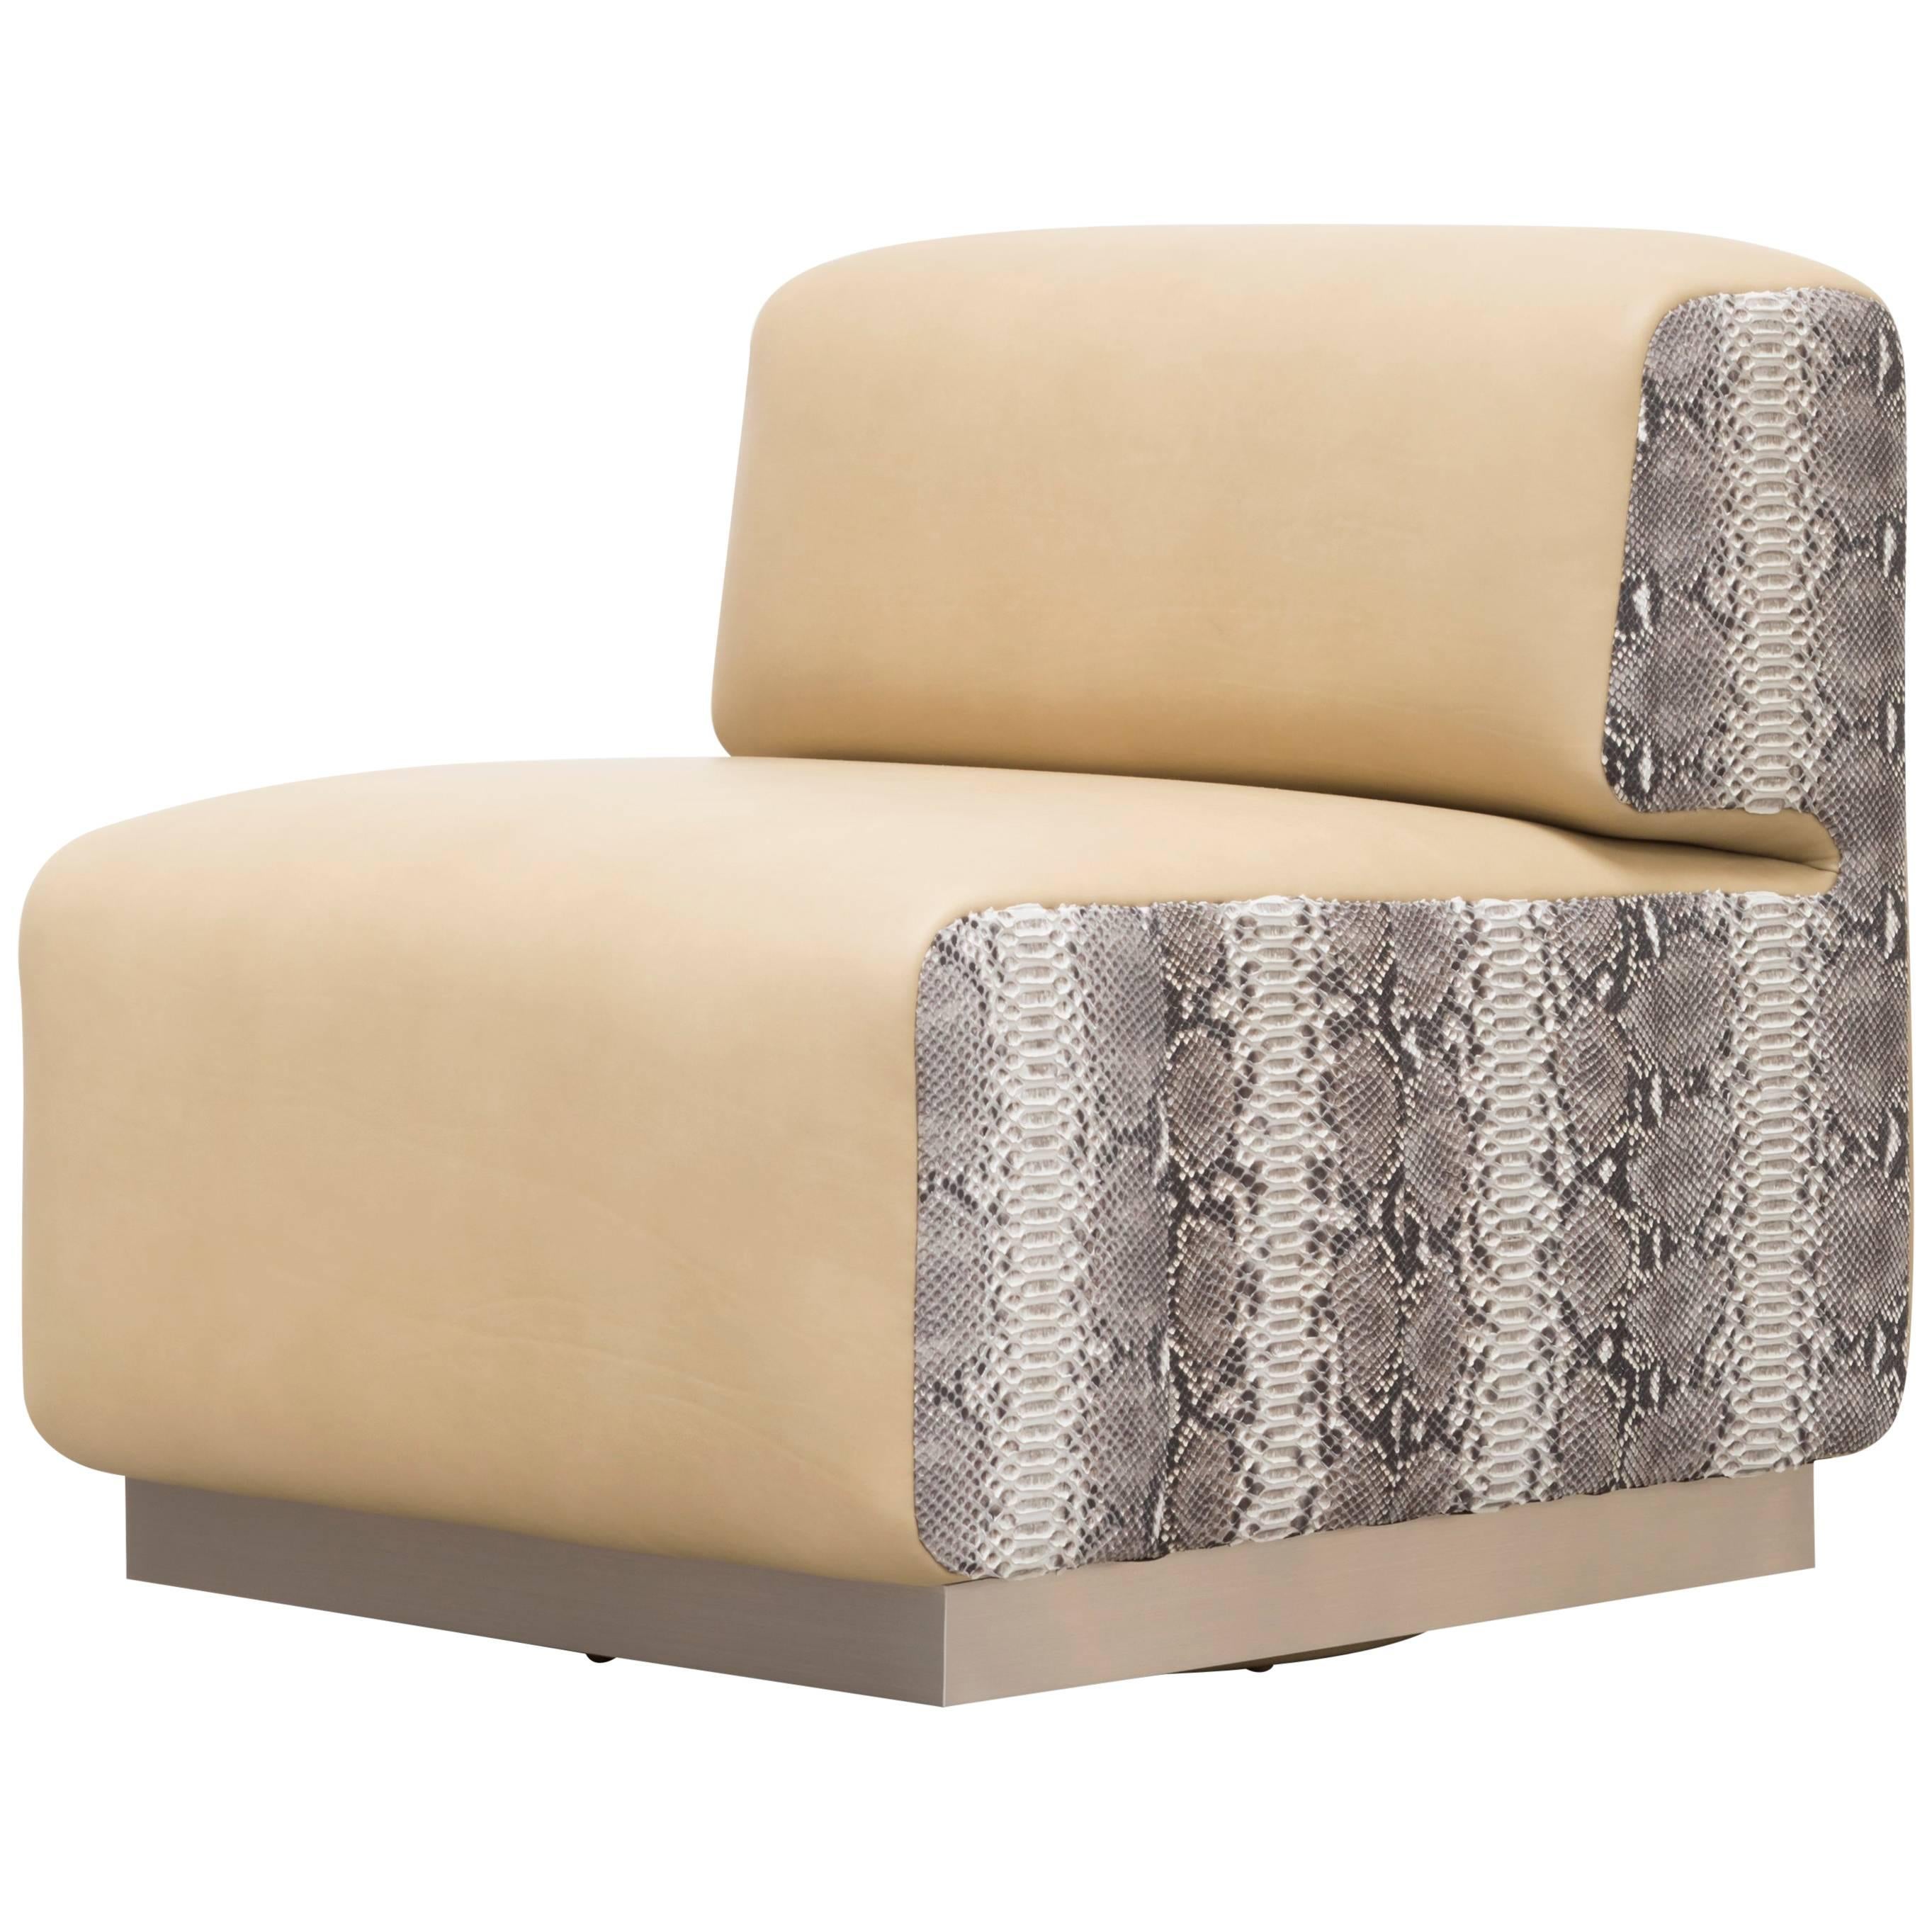 LEGER CHAIR - Modern Chair COL with Python Skin Side Panels